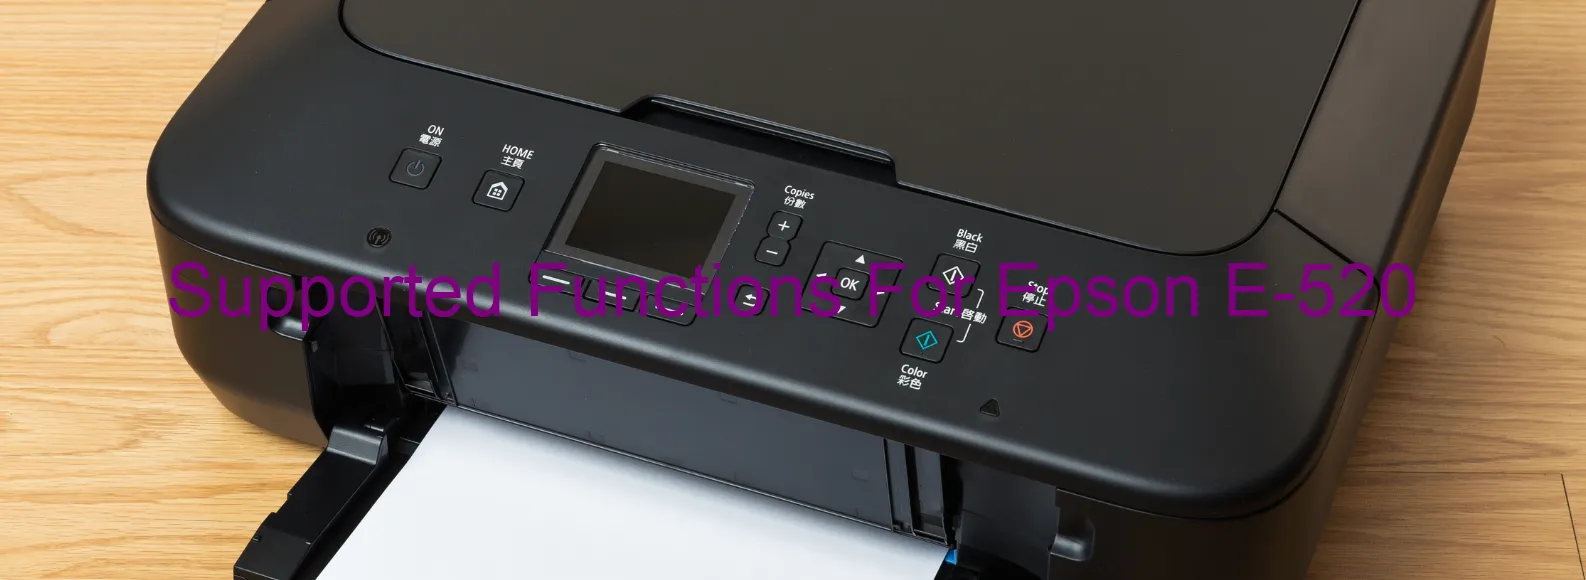 supported-functions-for-epson-e-520.webp